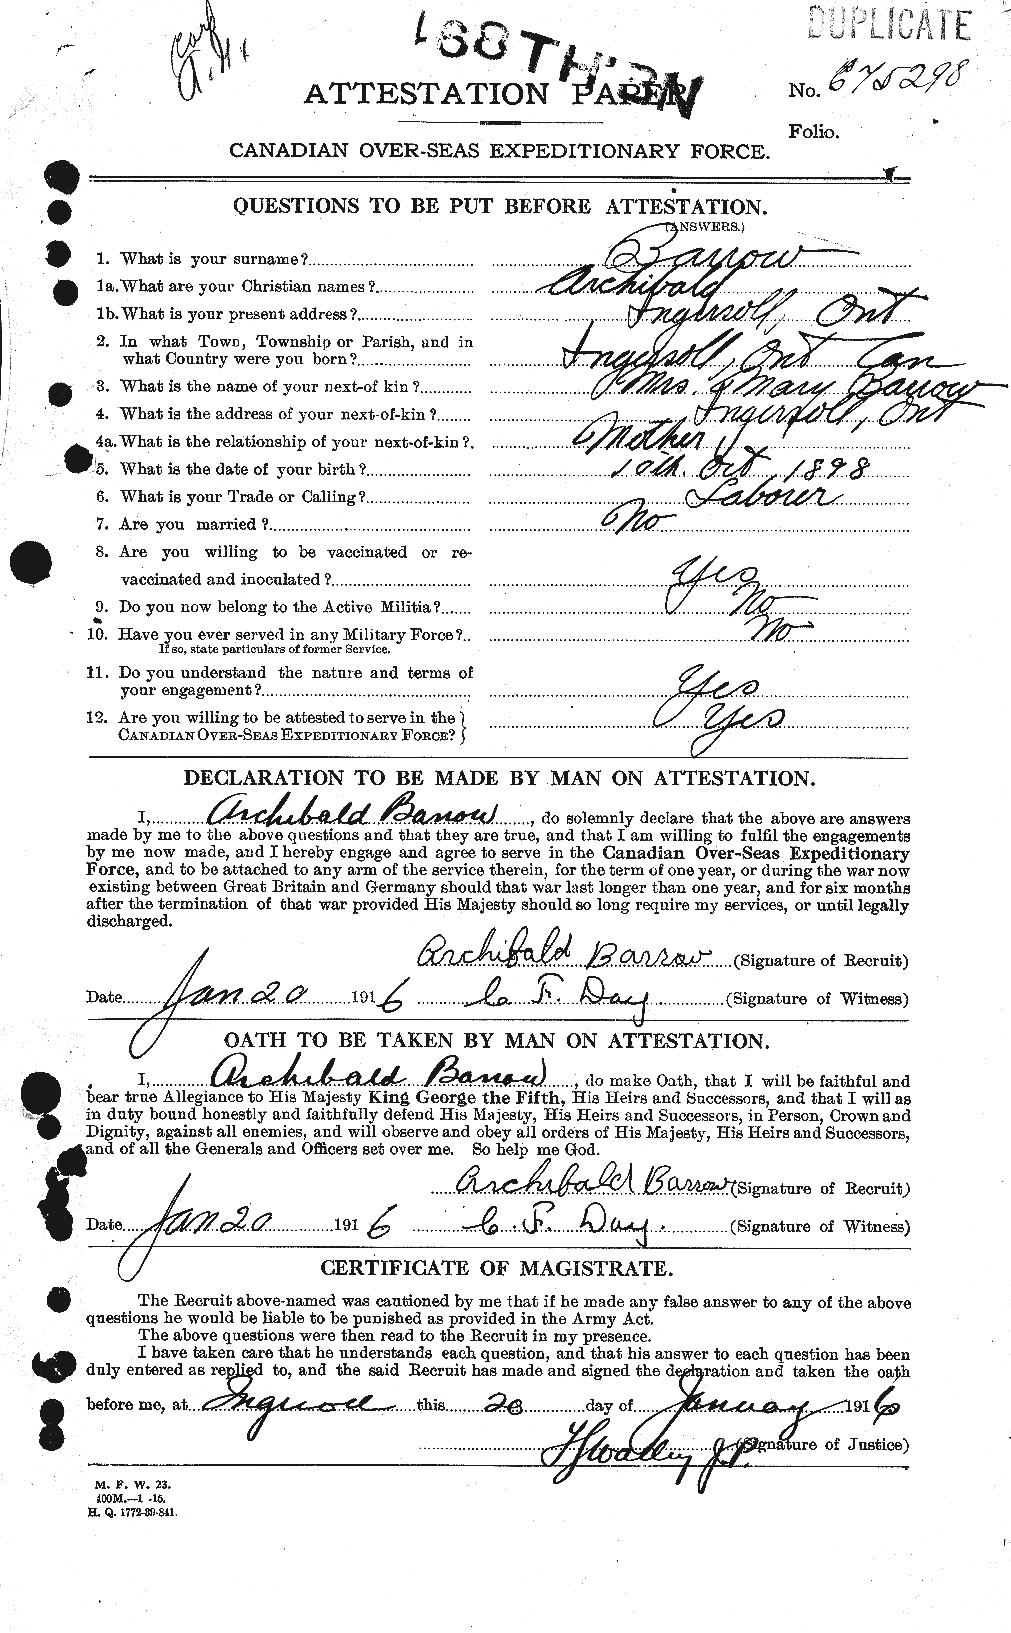 Personnel Records of the First World War - CEF 221789a